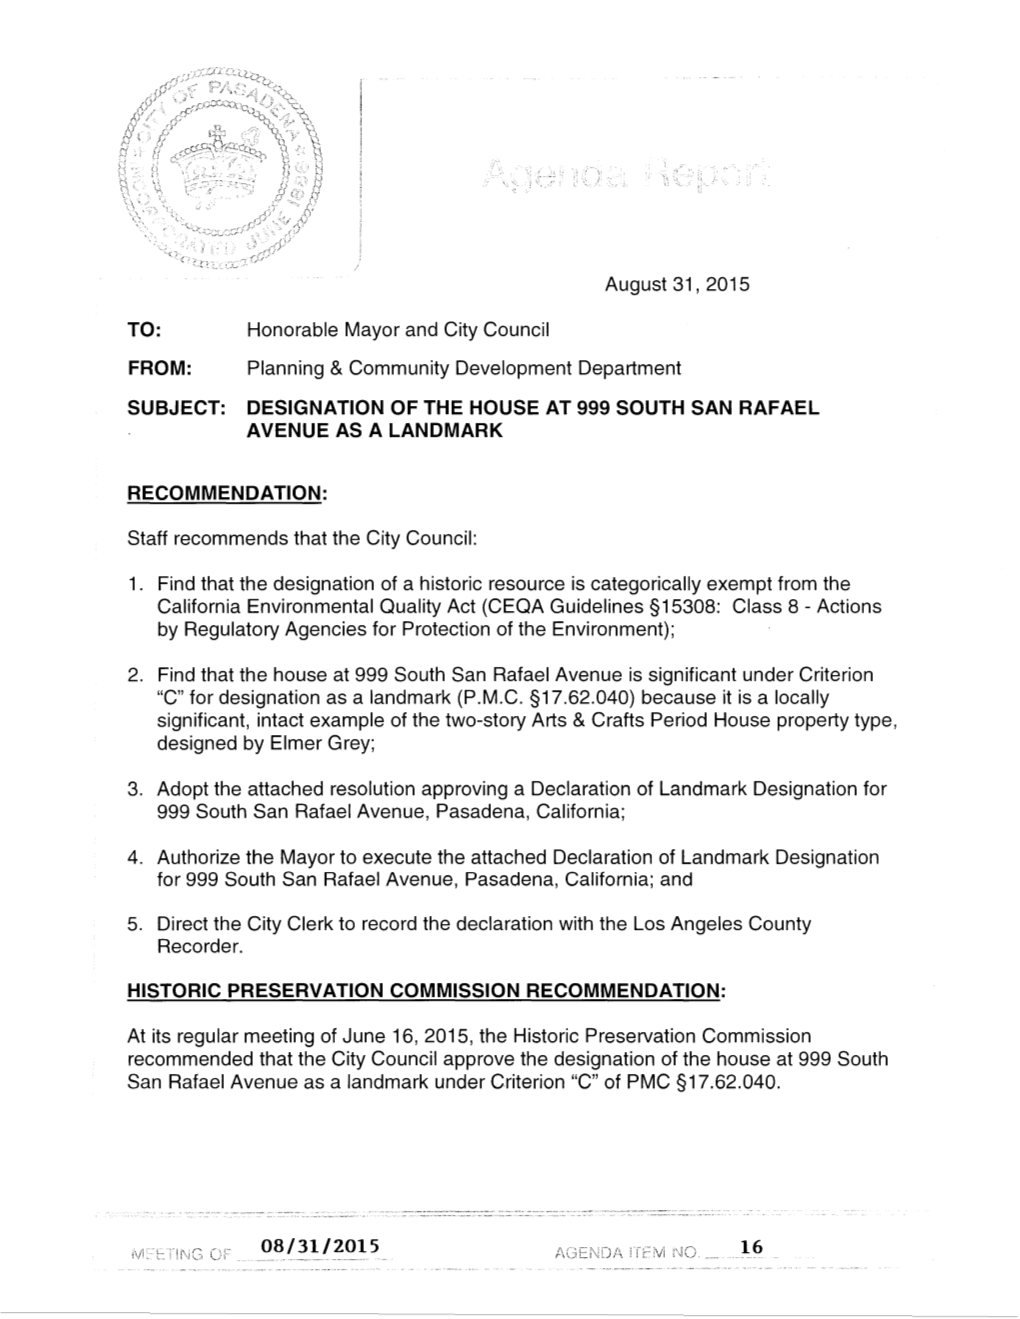 Historic Preservation Commission Recommendation